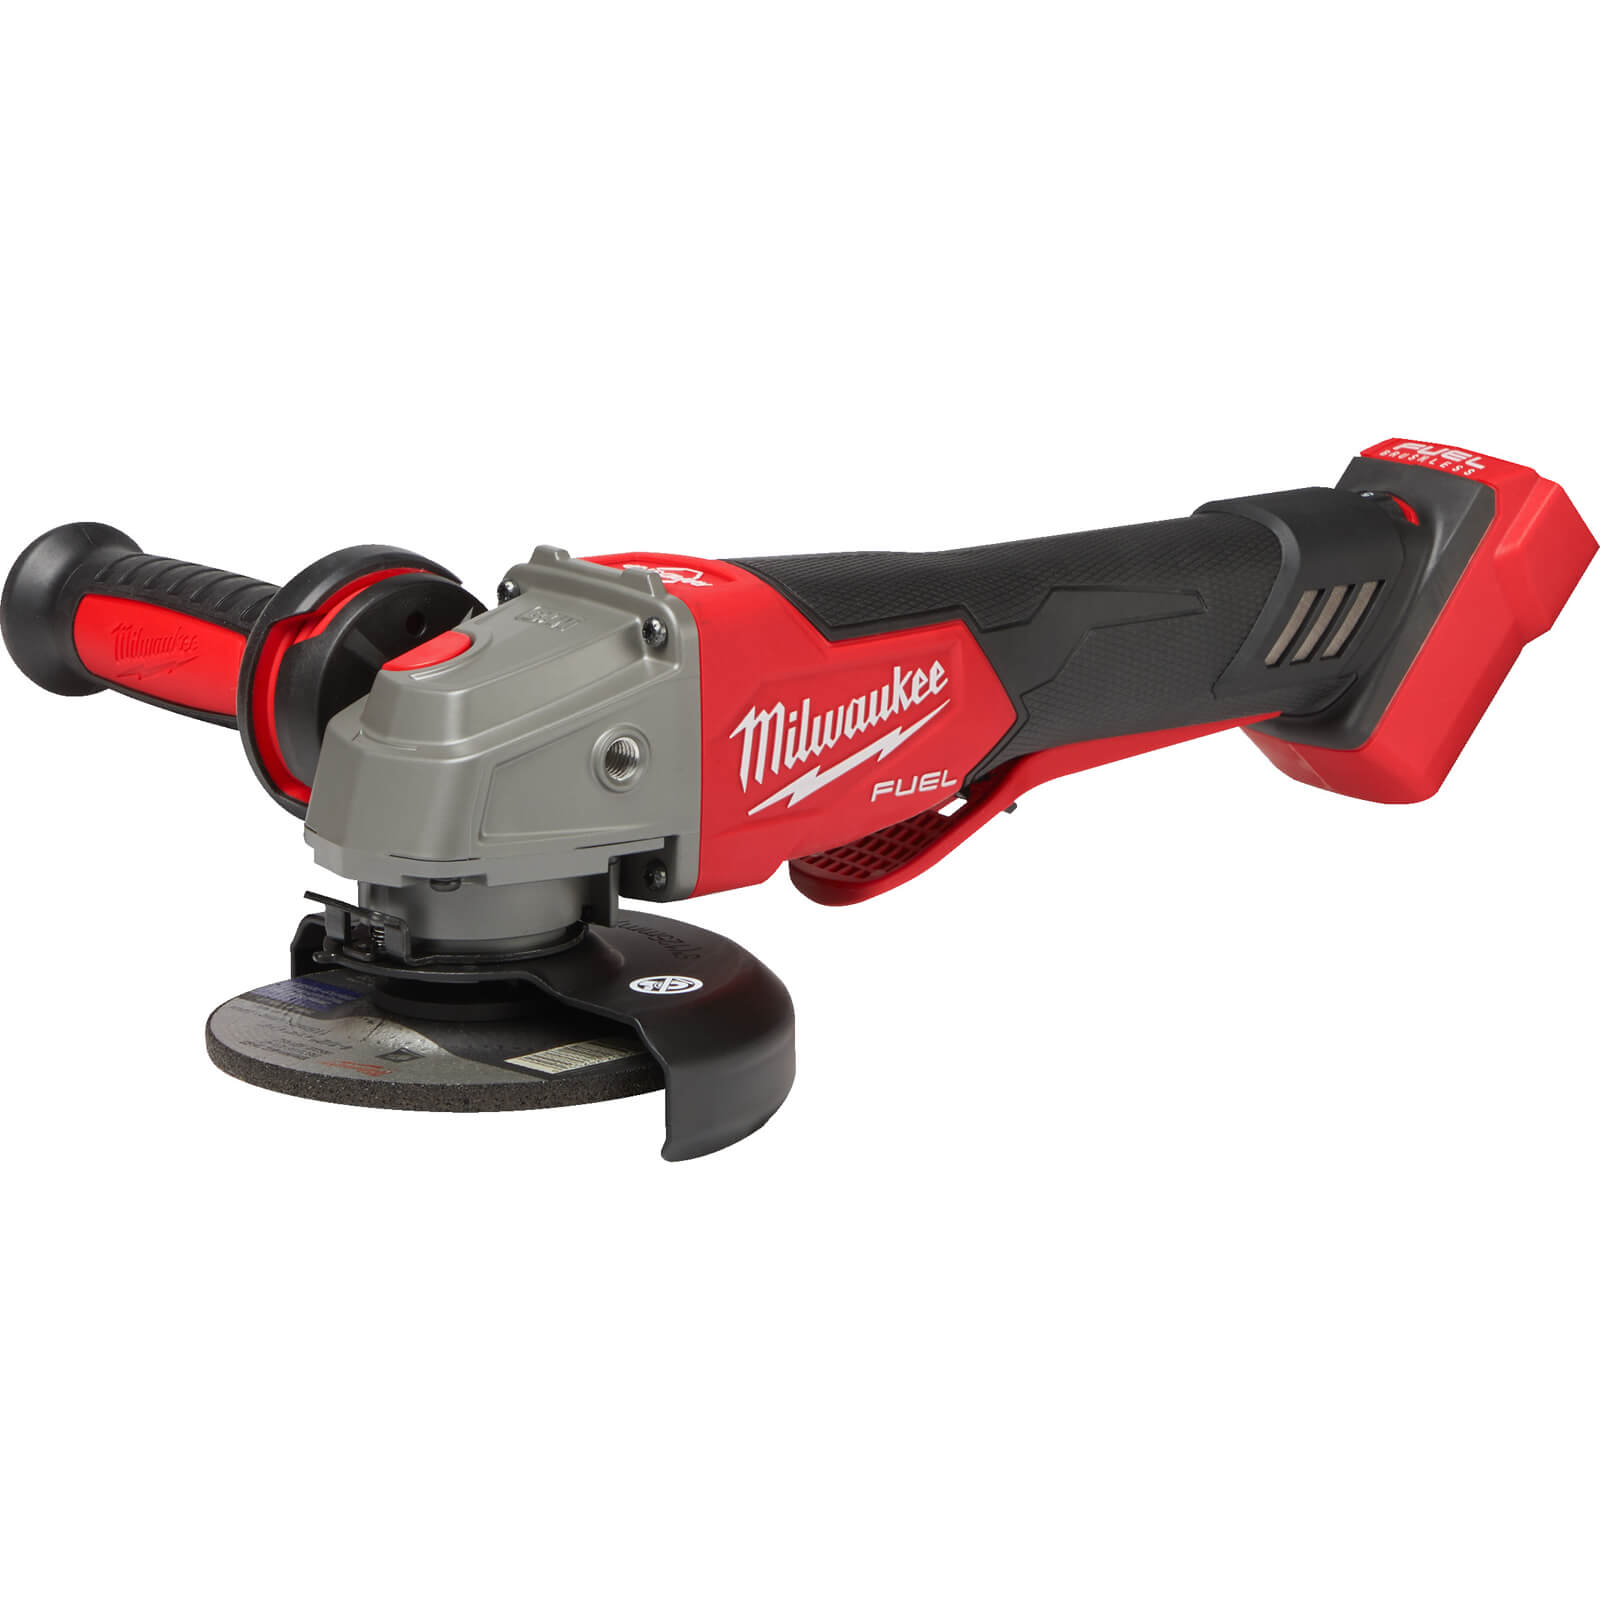 Image of Milwaukee M18 FSAGV115XPDB Fuel 18v Cordless Brushless Angle Grinder 115mm No Batteries No Charger No Case